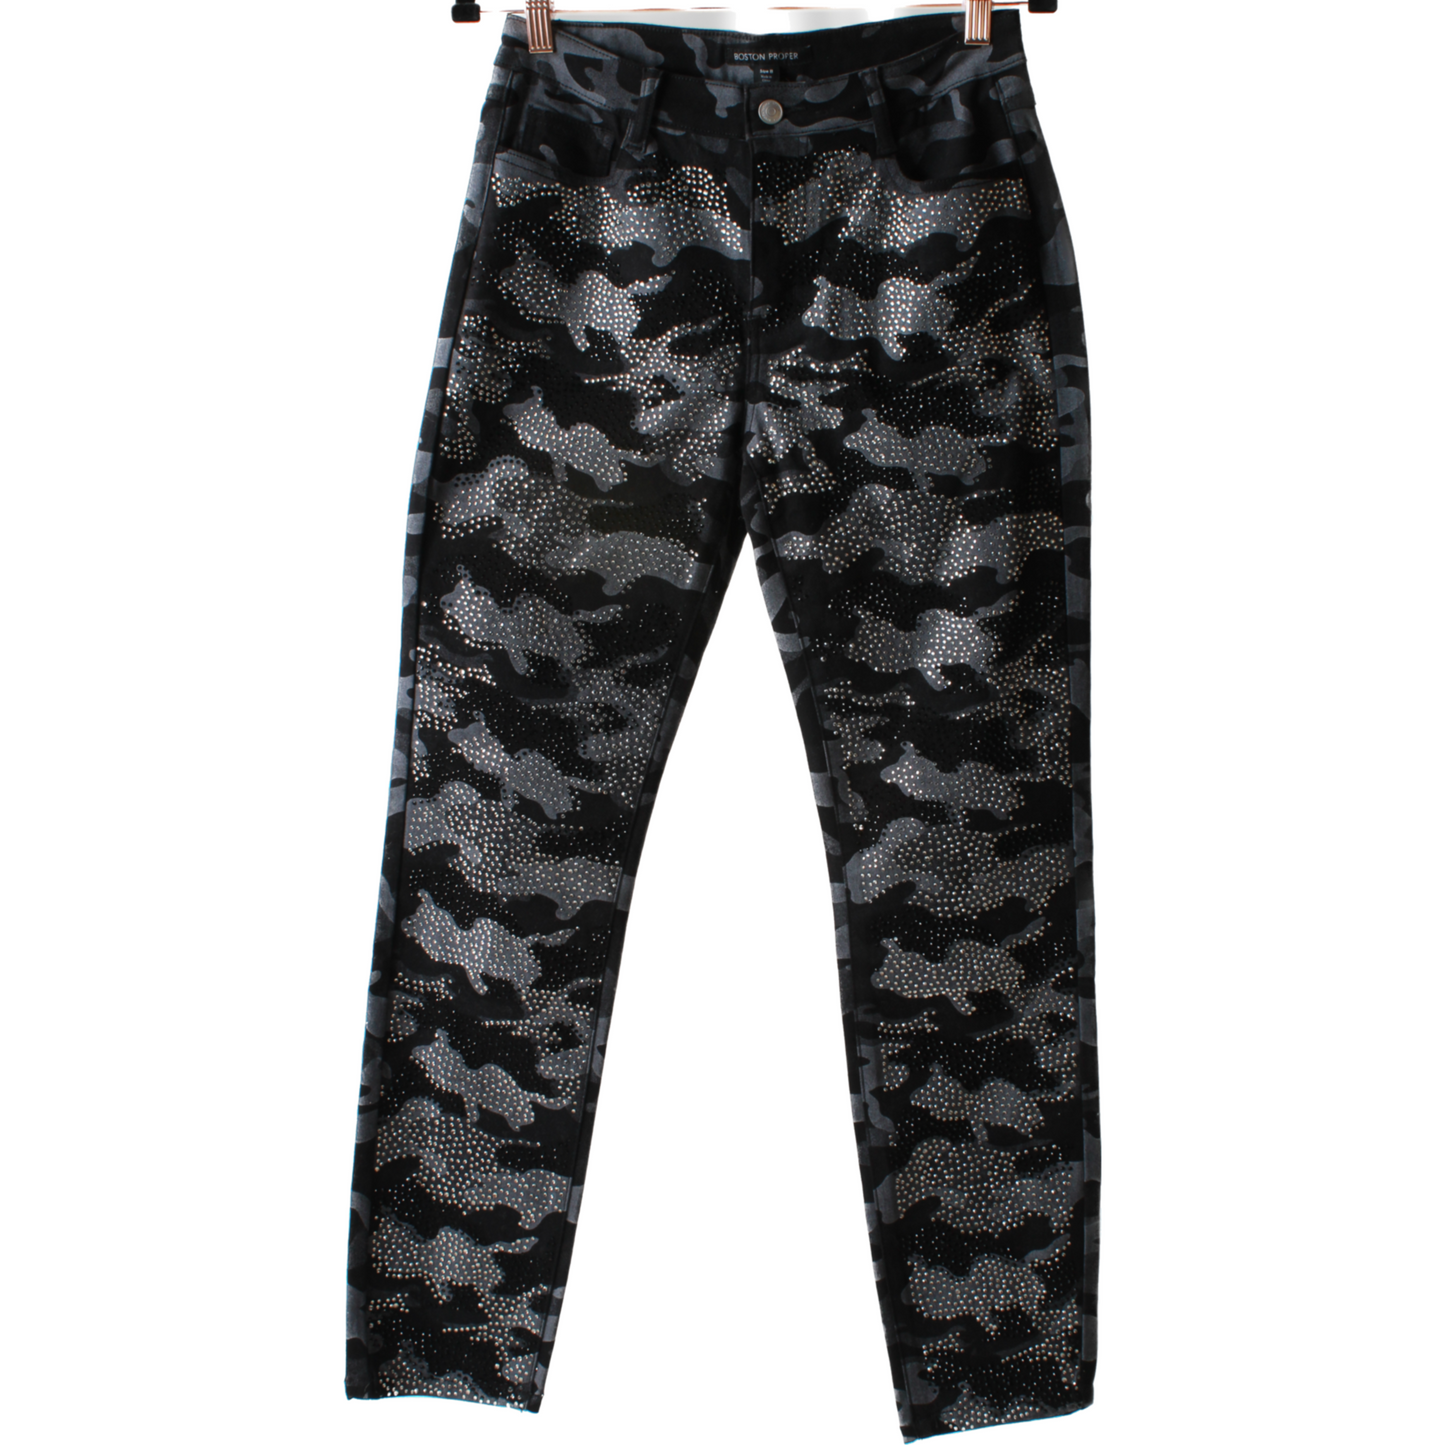 Bedazzled Army Fatique Skinny Jeans (8)